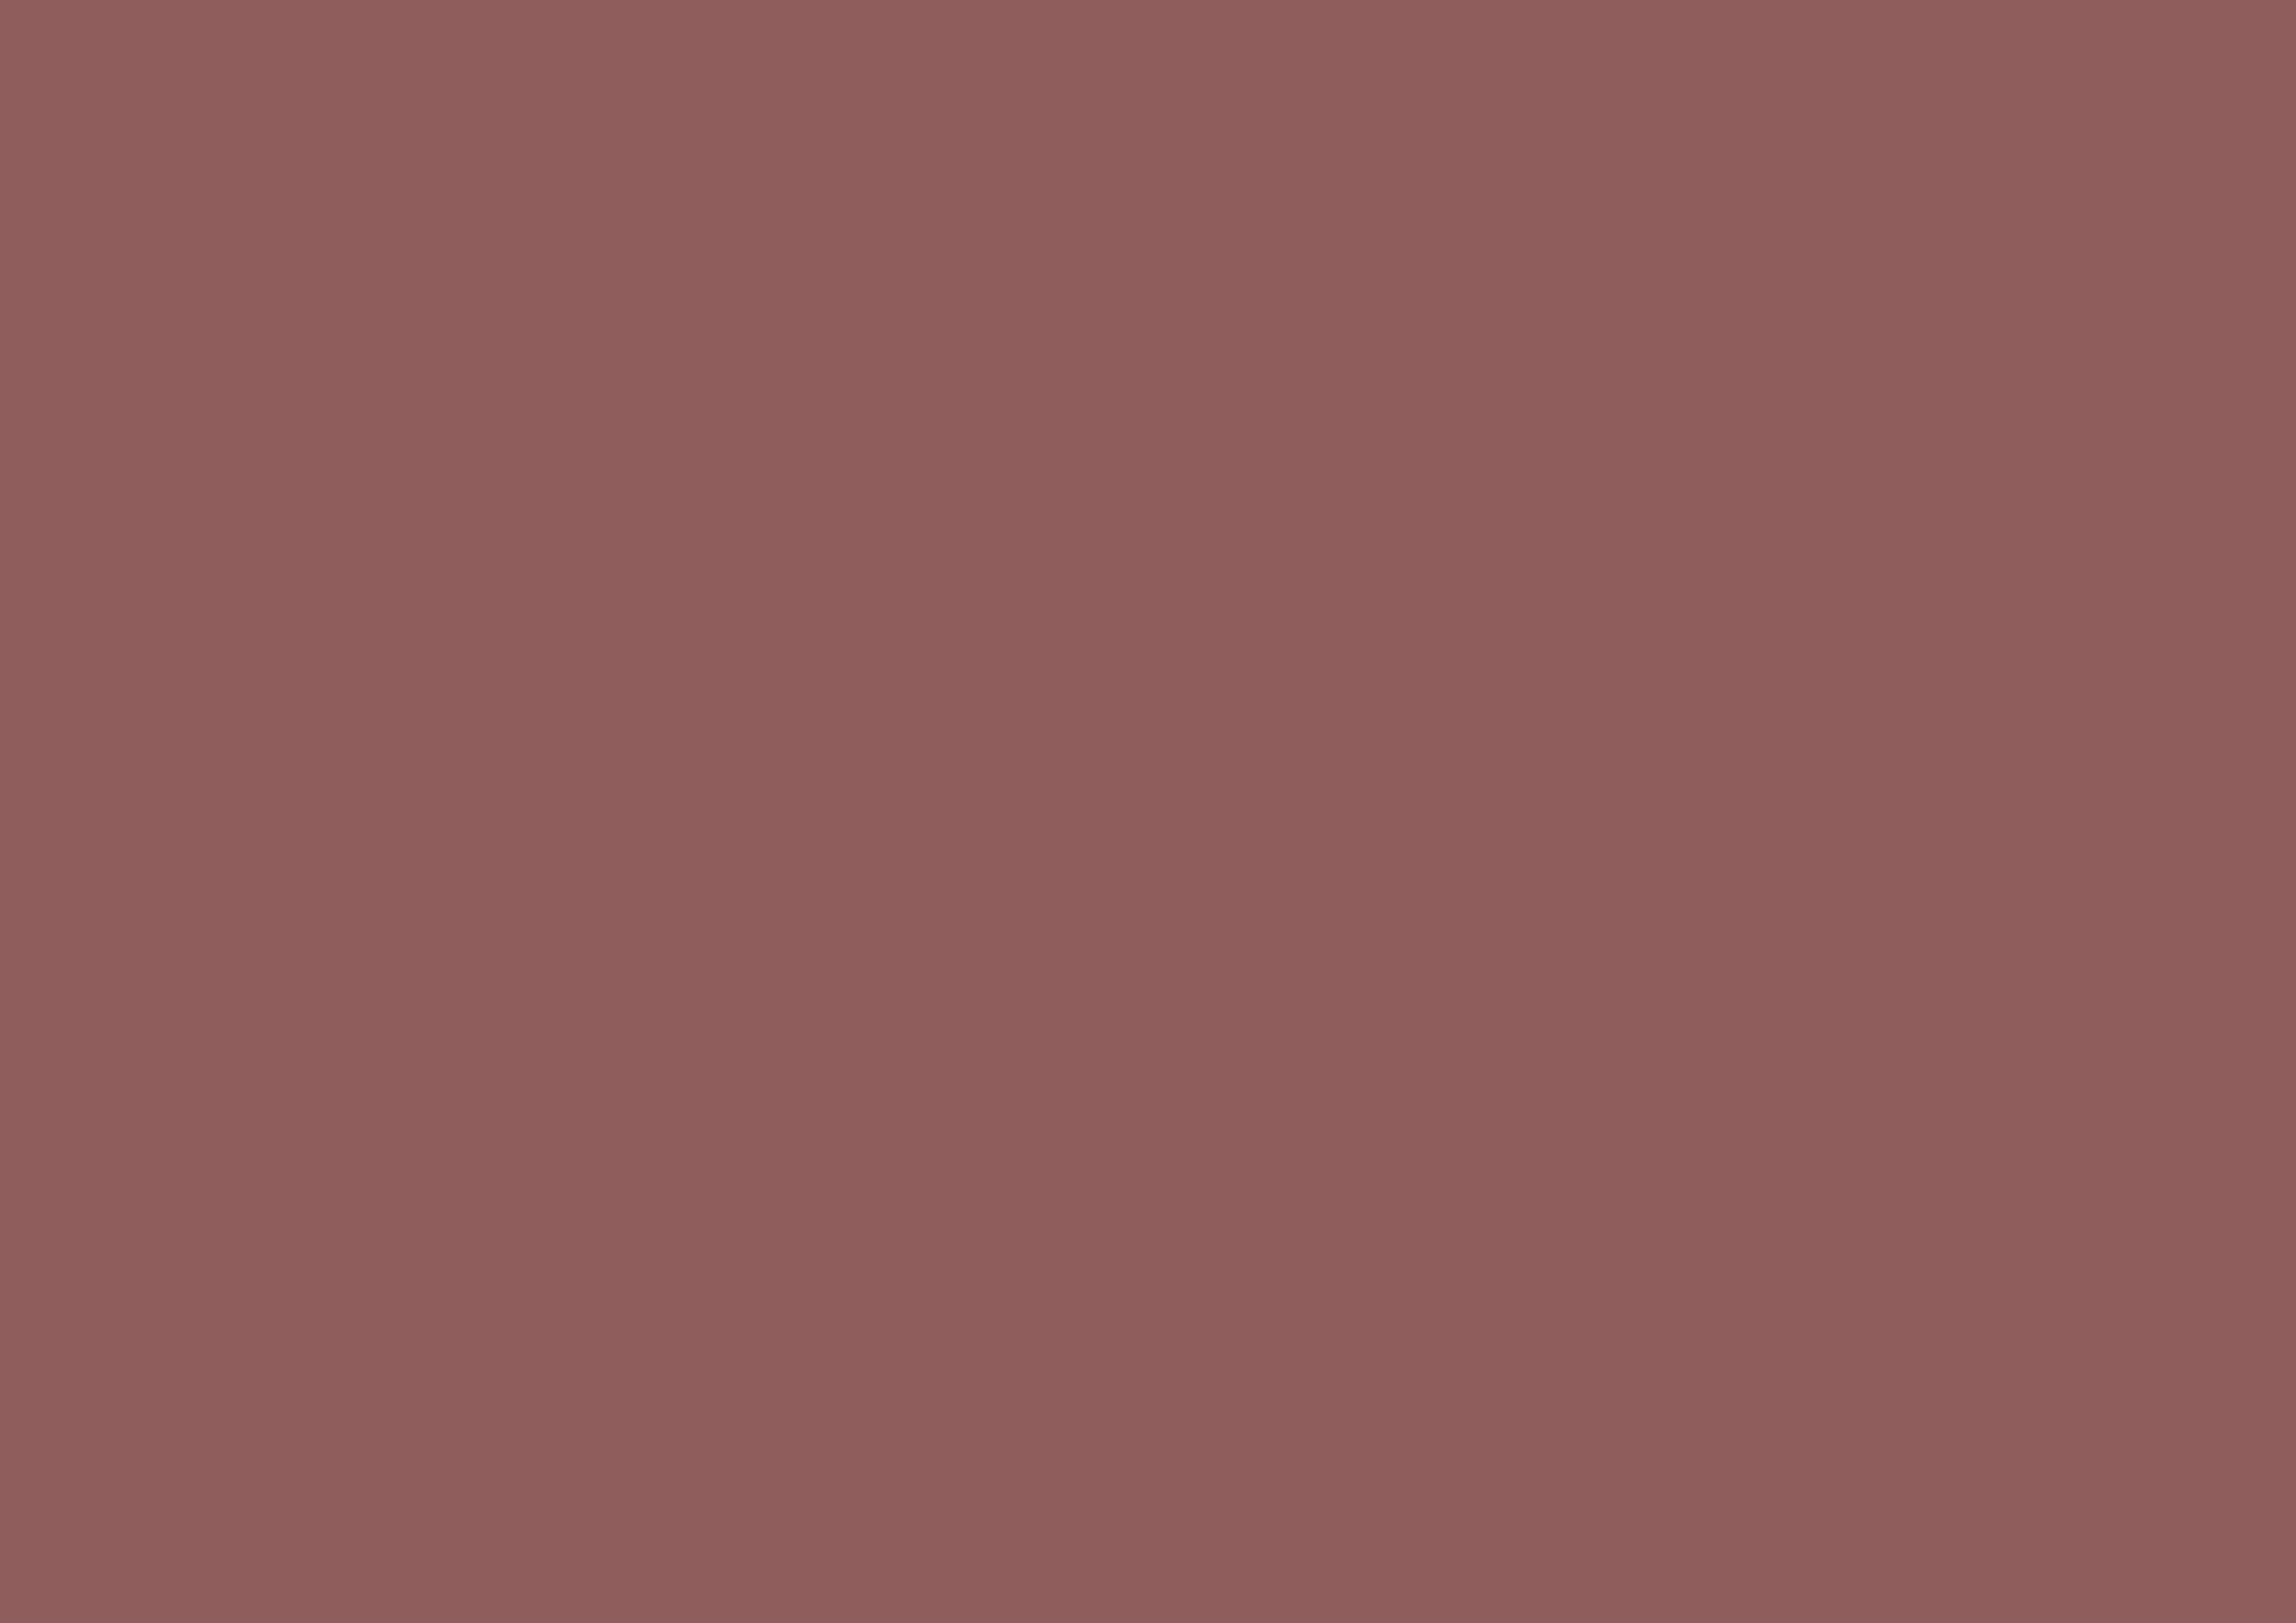 3508x2480 Rose Taupe Solid Color Background